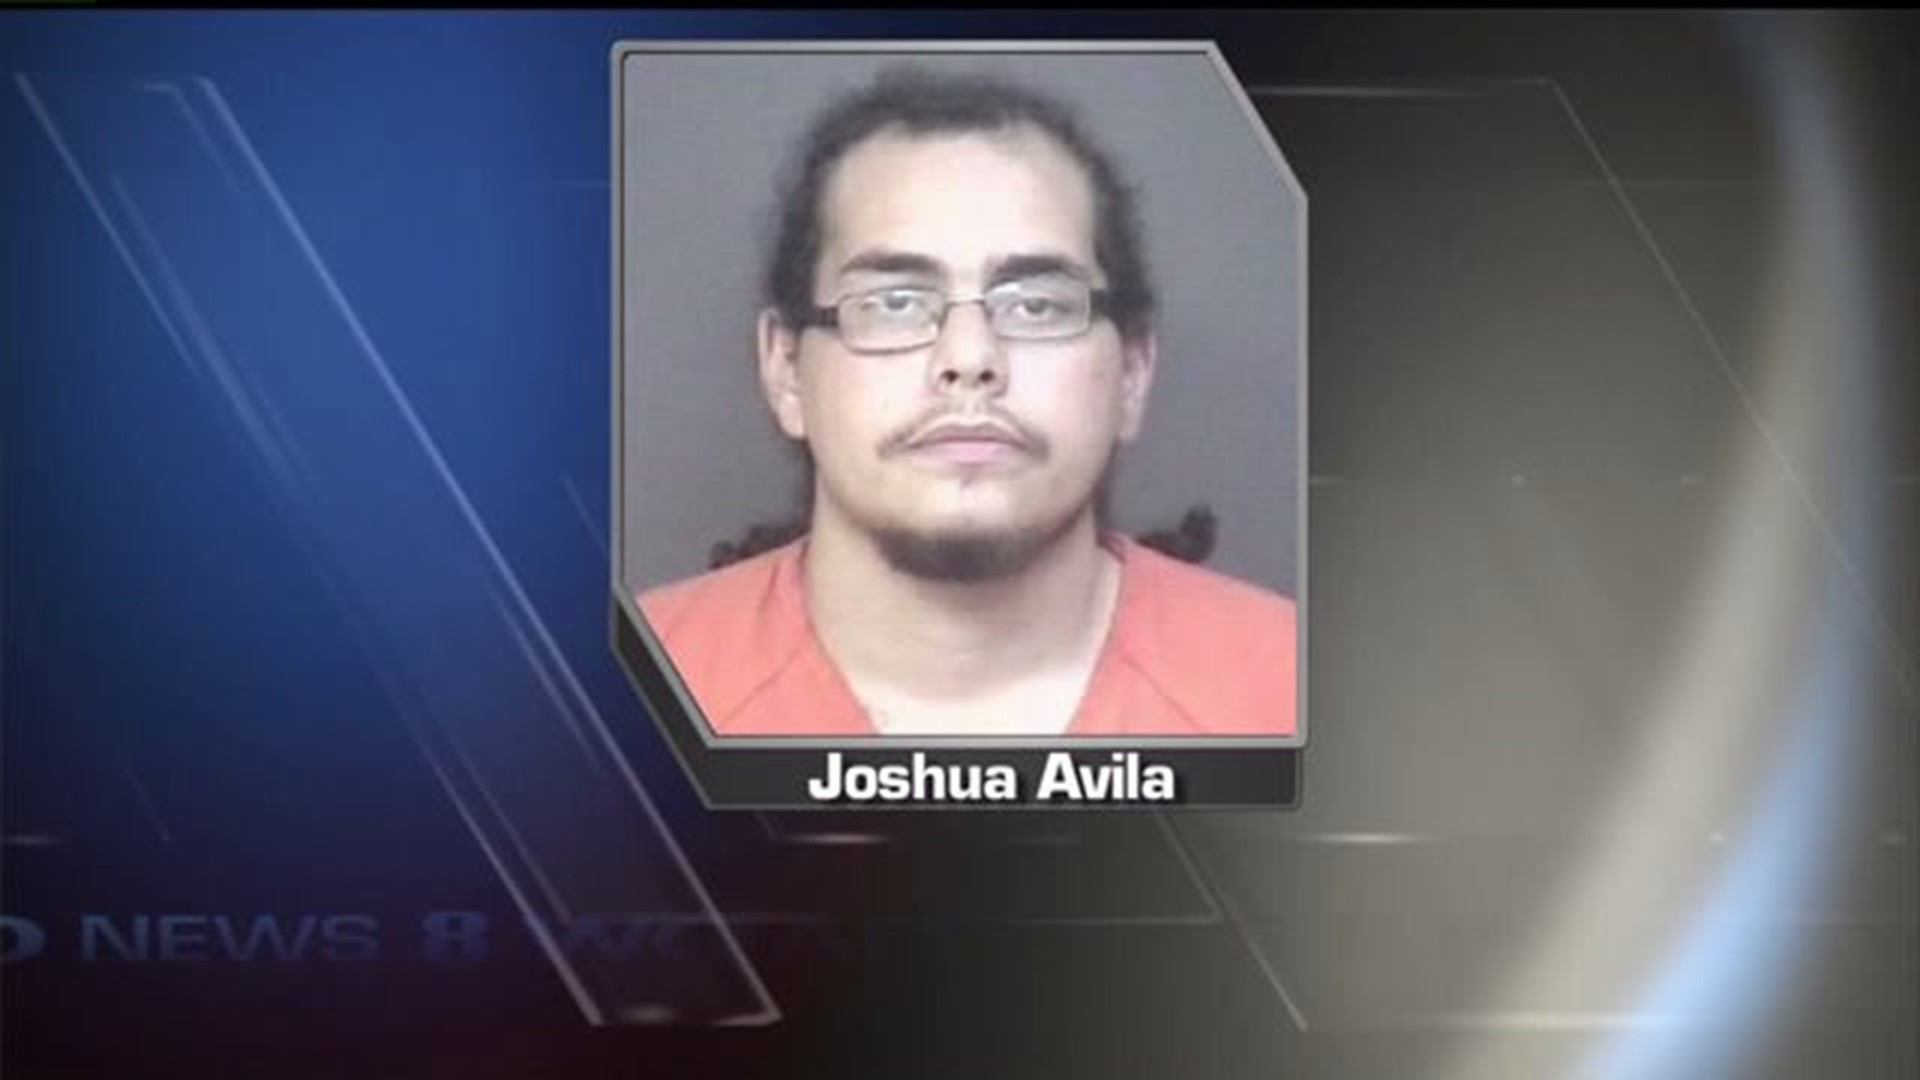 Man accused of burning toddler by holding child in scalding water